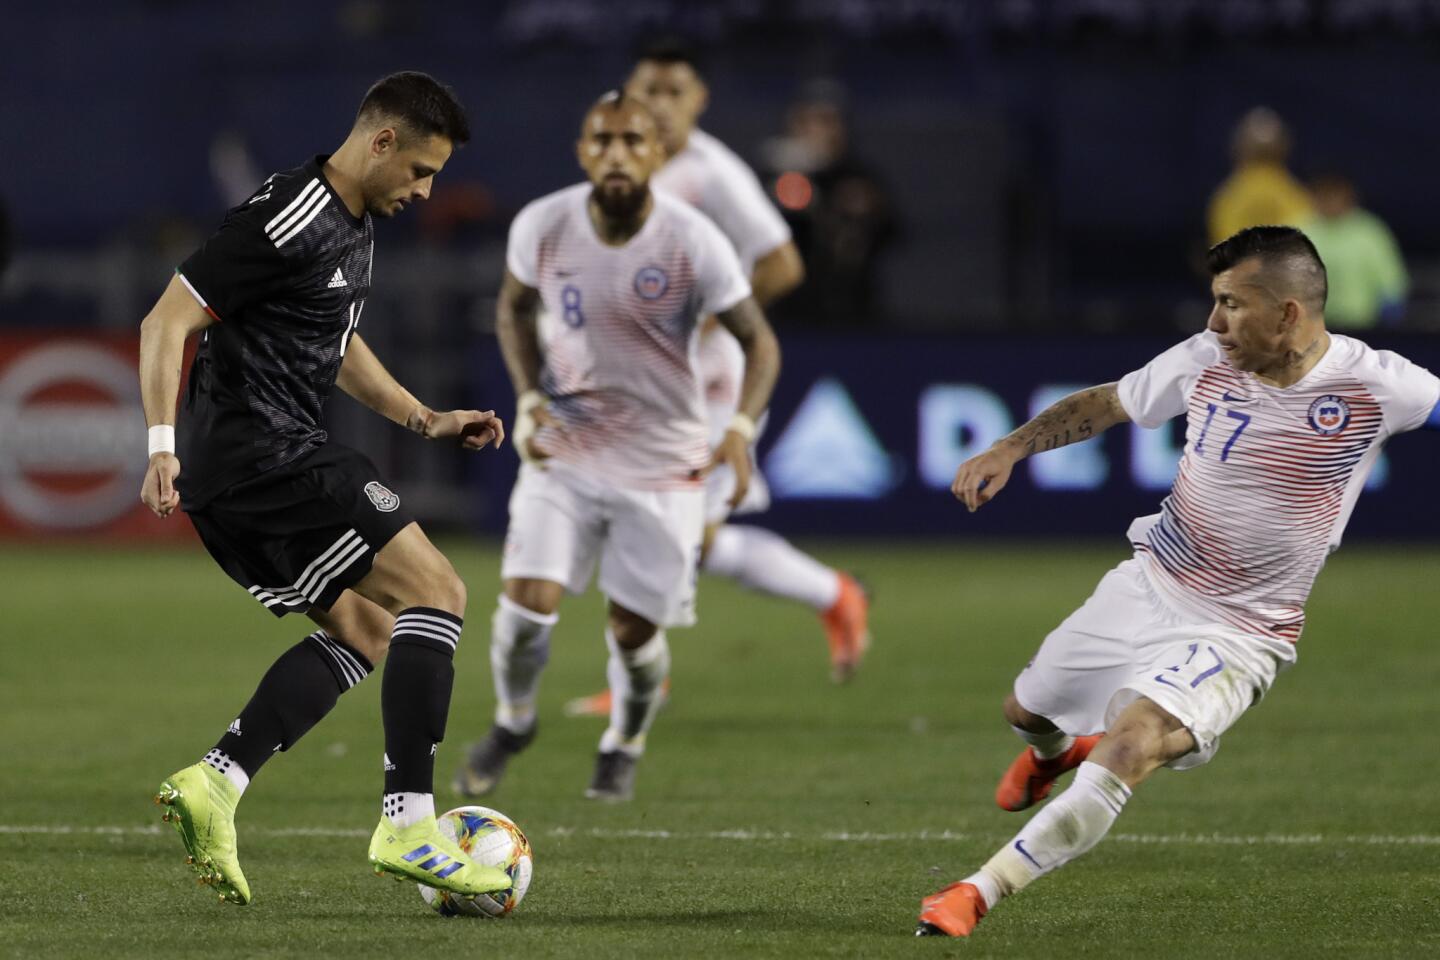 Mexico's Javier Hernandez, left, dribbles the ball as Chile's Gary Mendel, right, defends during the second half of an international friendly soccer match Friday, March 22, 2019, in San Diego. (AP Photo/Gregory Bull)